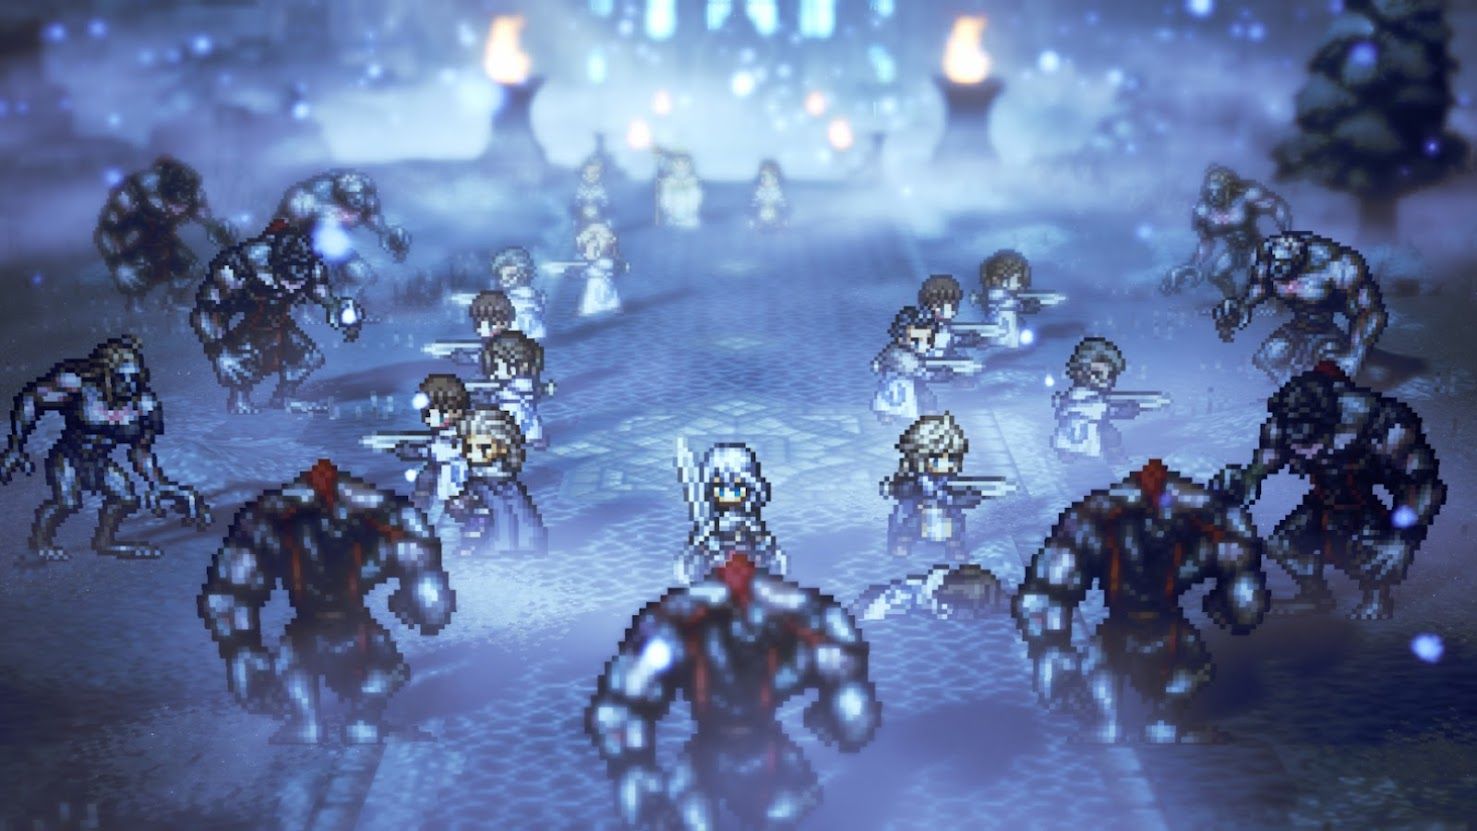 Octopath Traveler: Champions of the Continent - How to pre